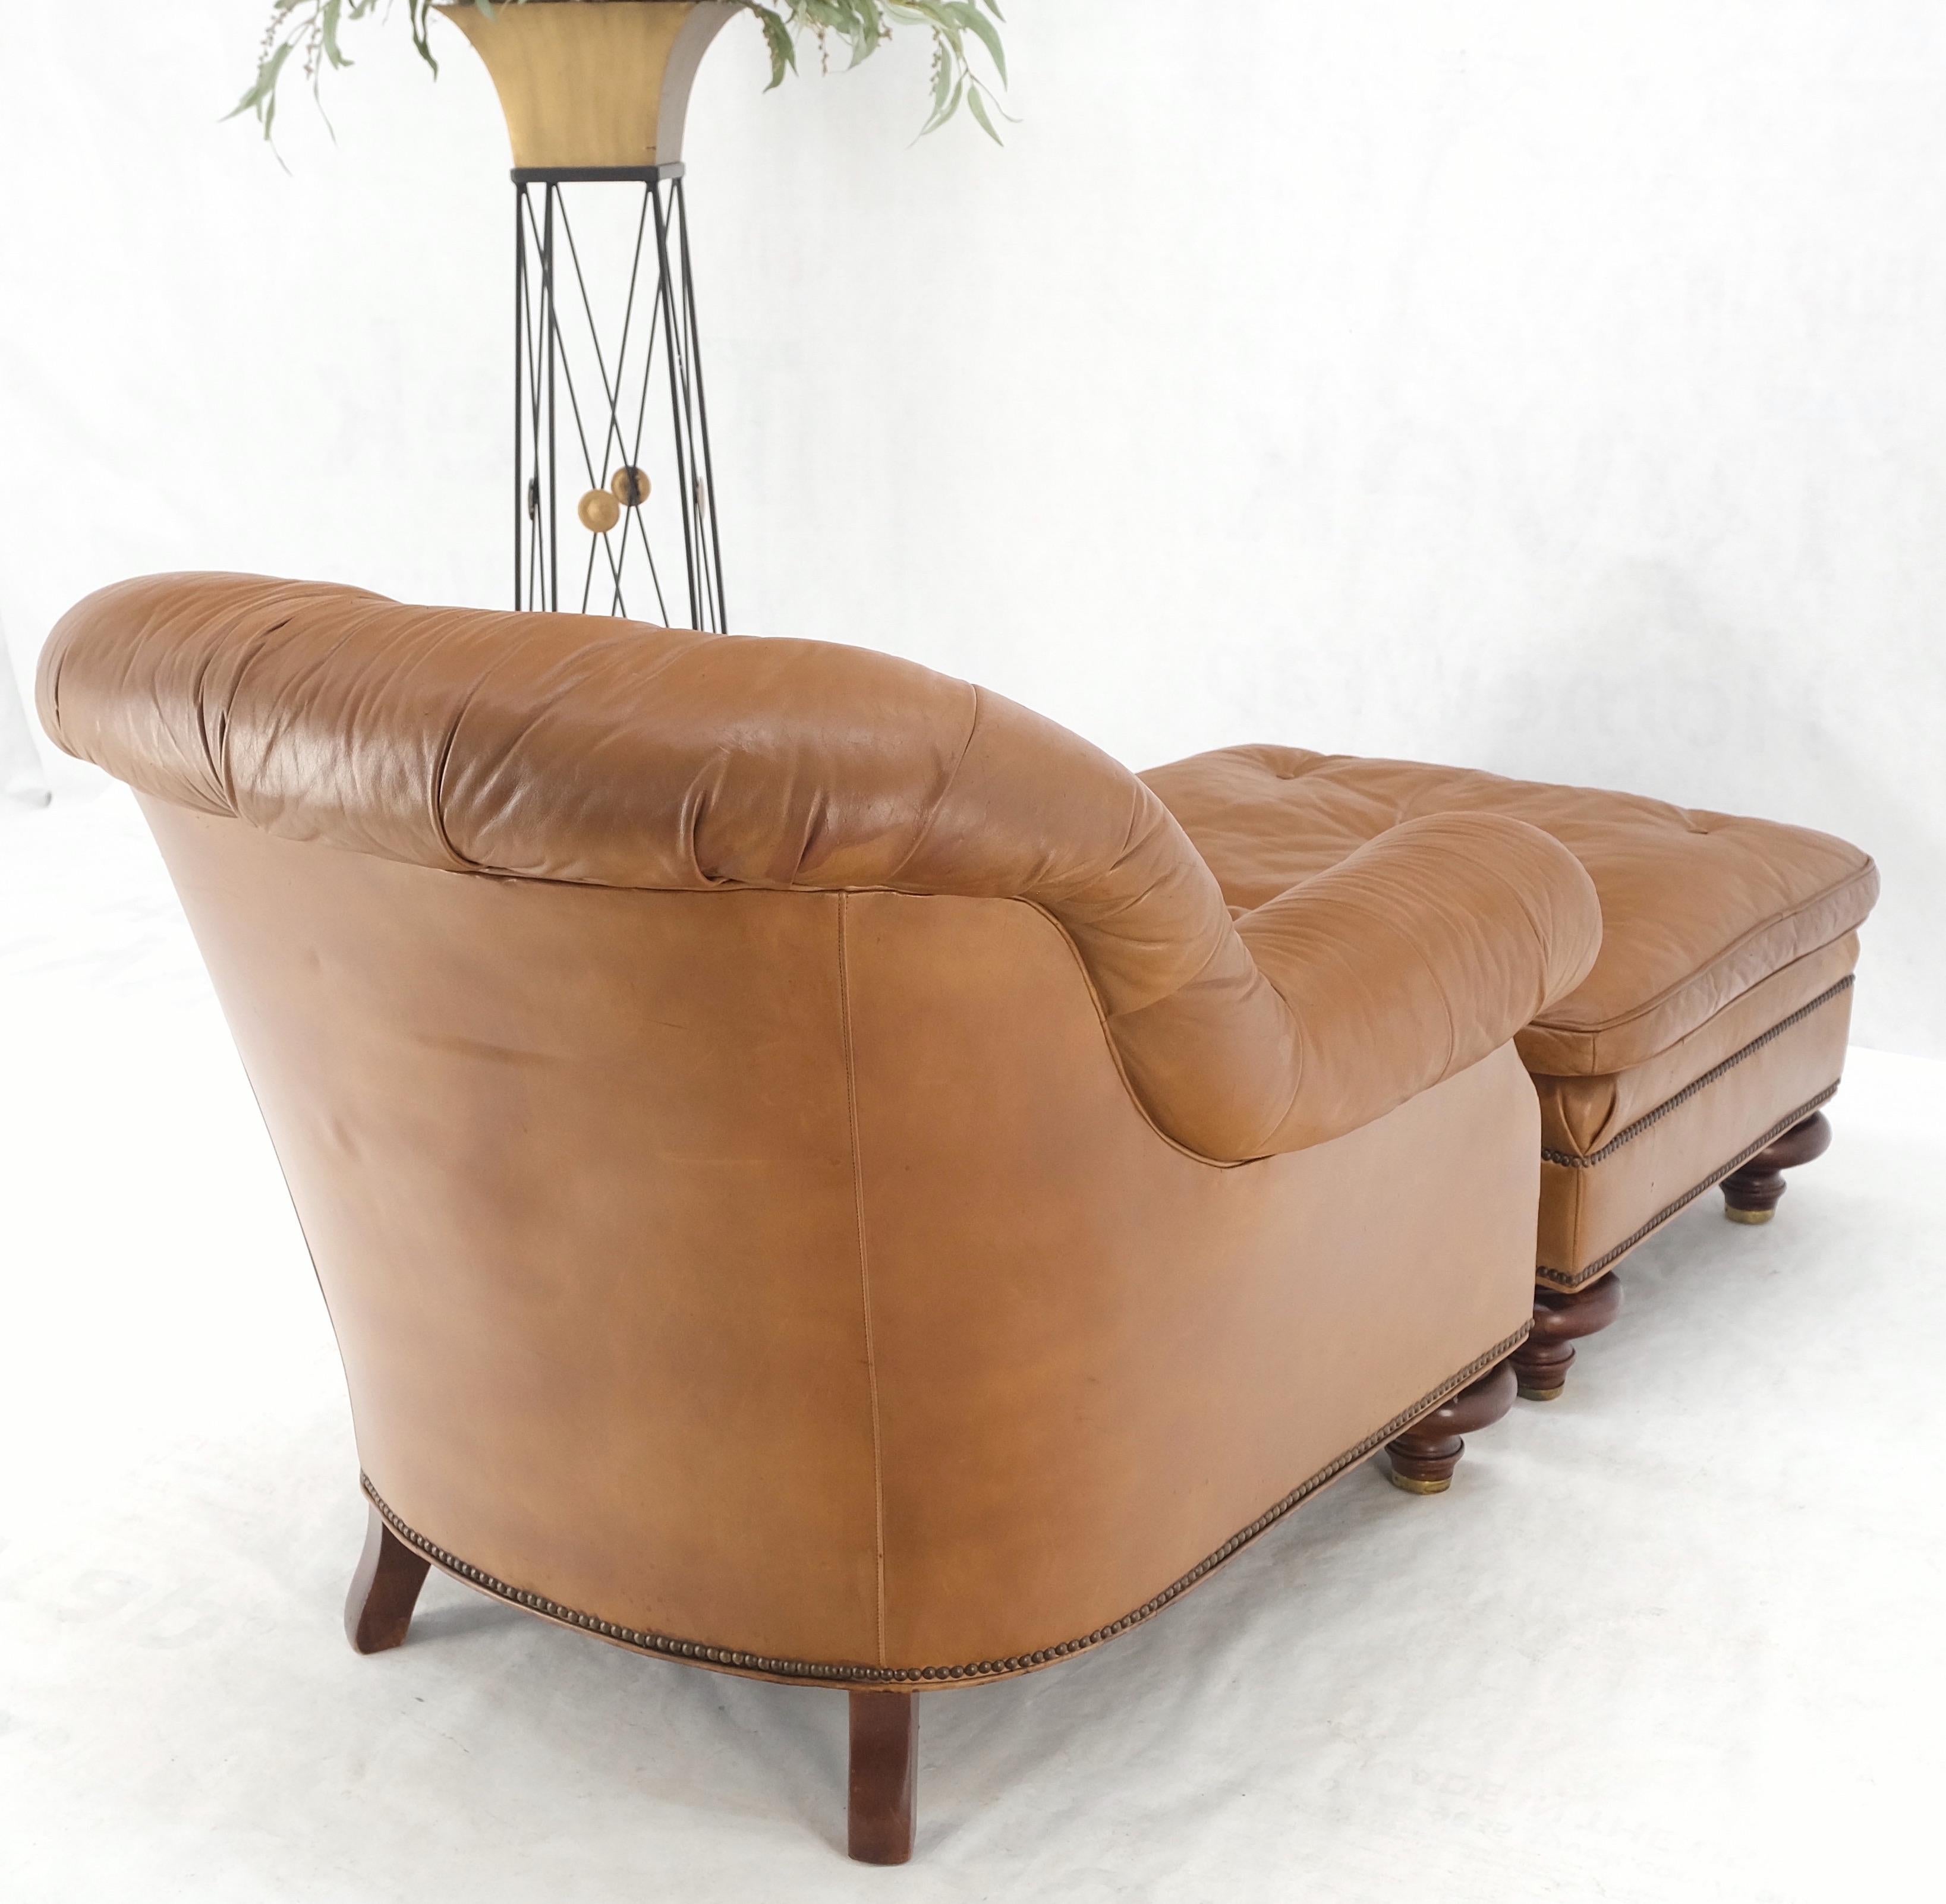 Baker Tan Leather Tufted Back Large Arm Chair w/ Ottoman Pouf Turned Legs MINT! For Sale 5